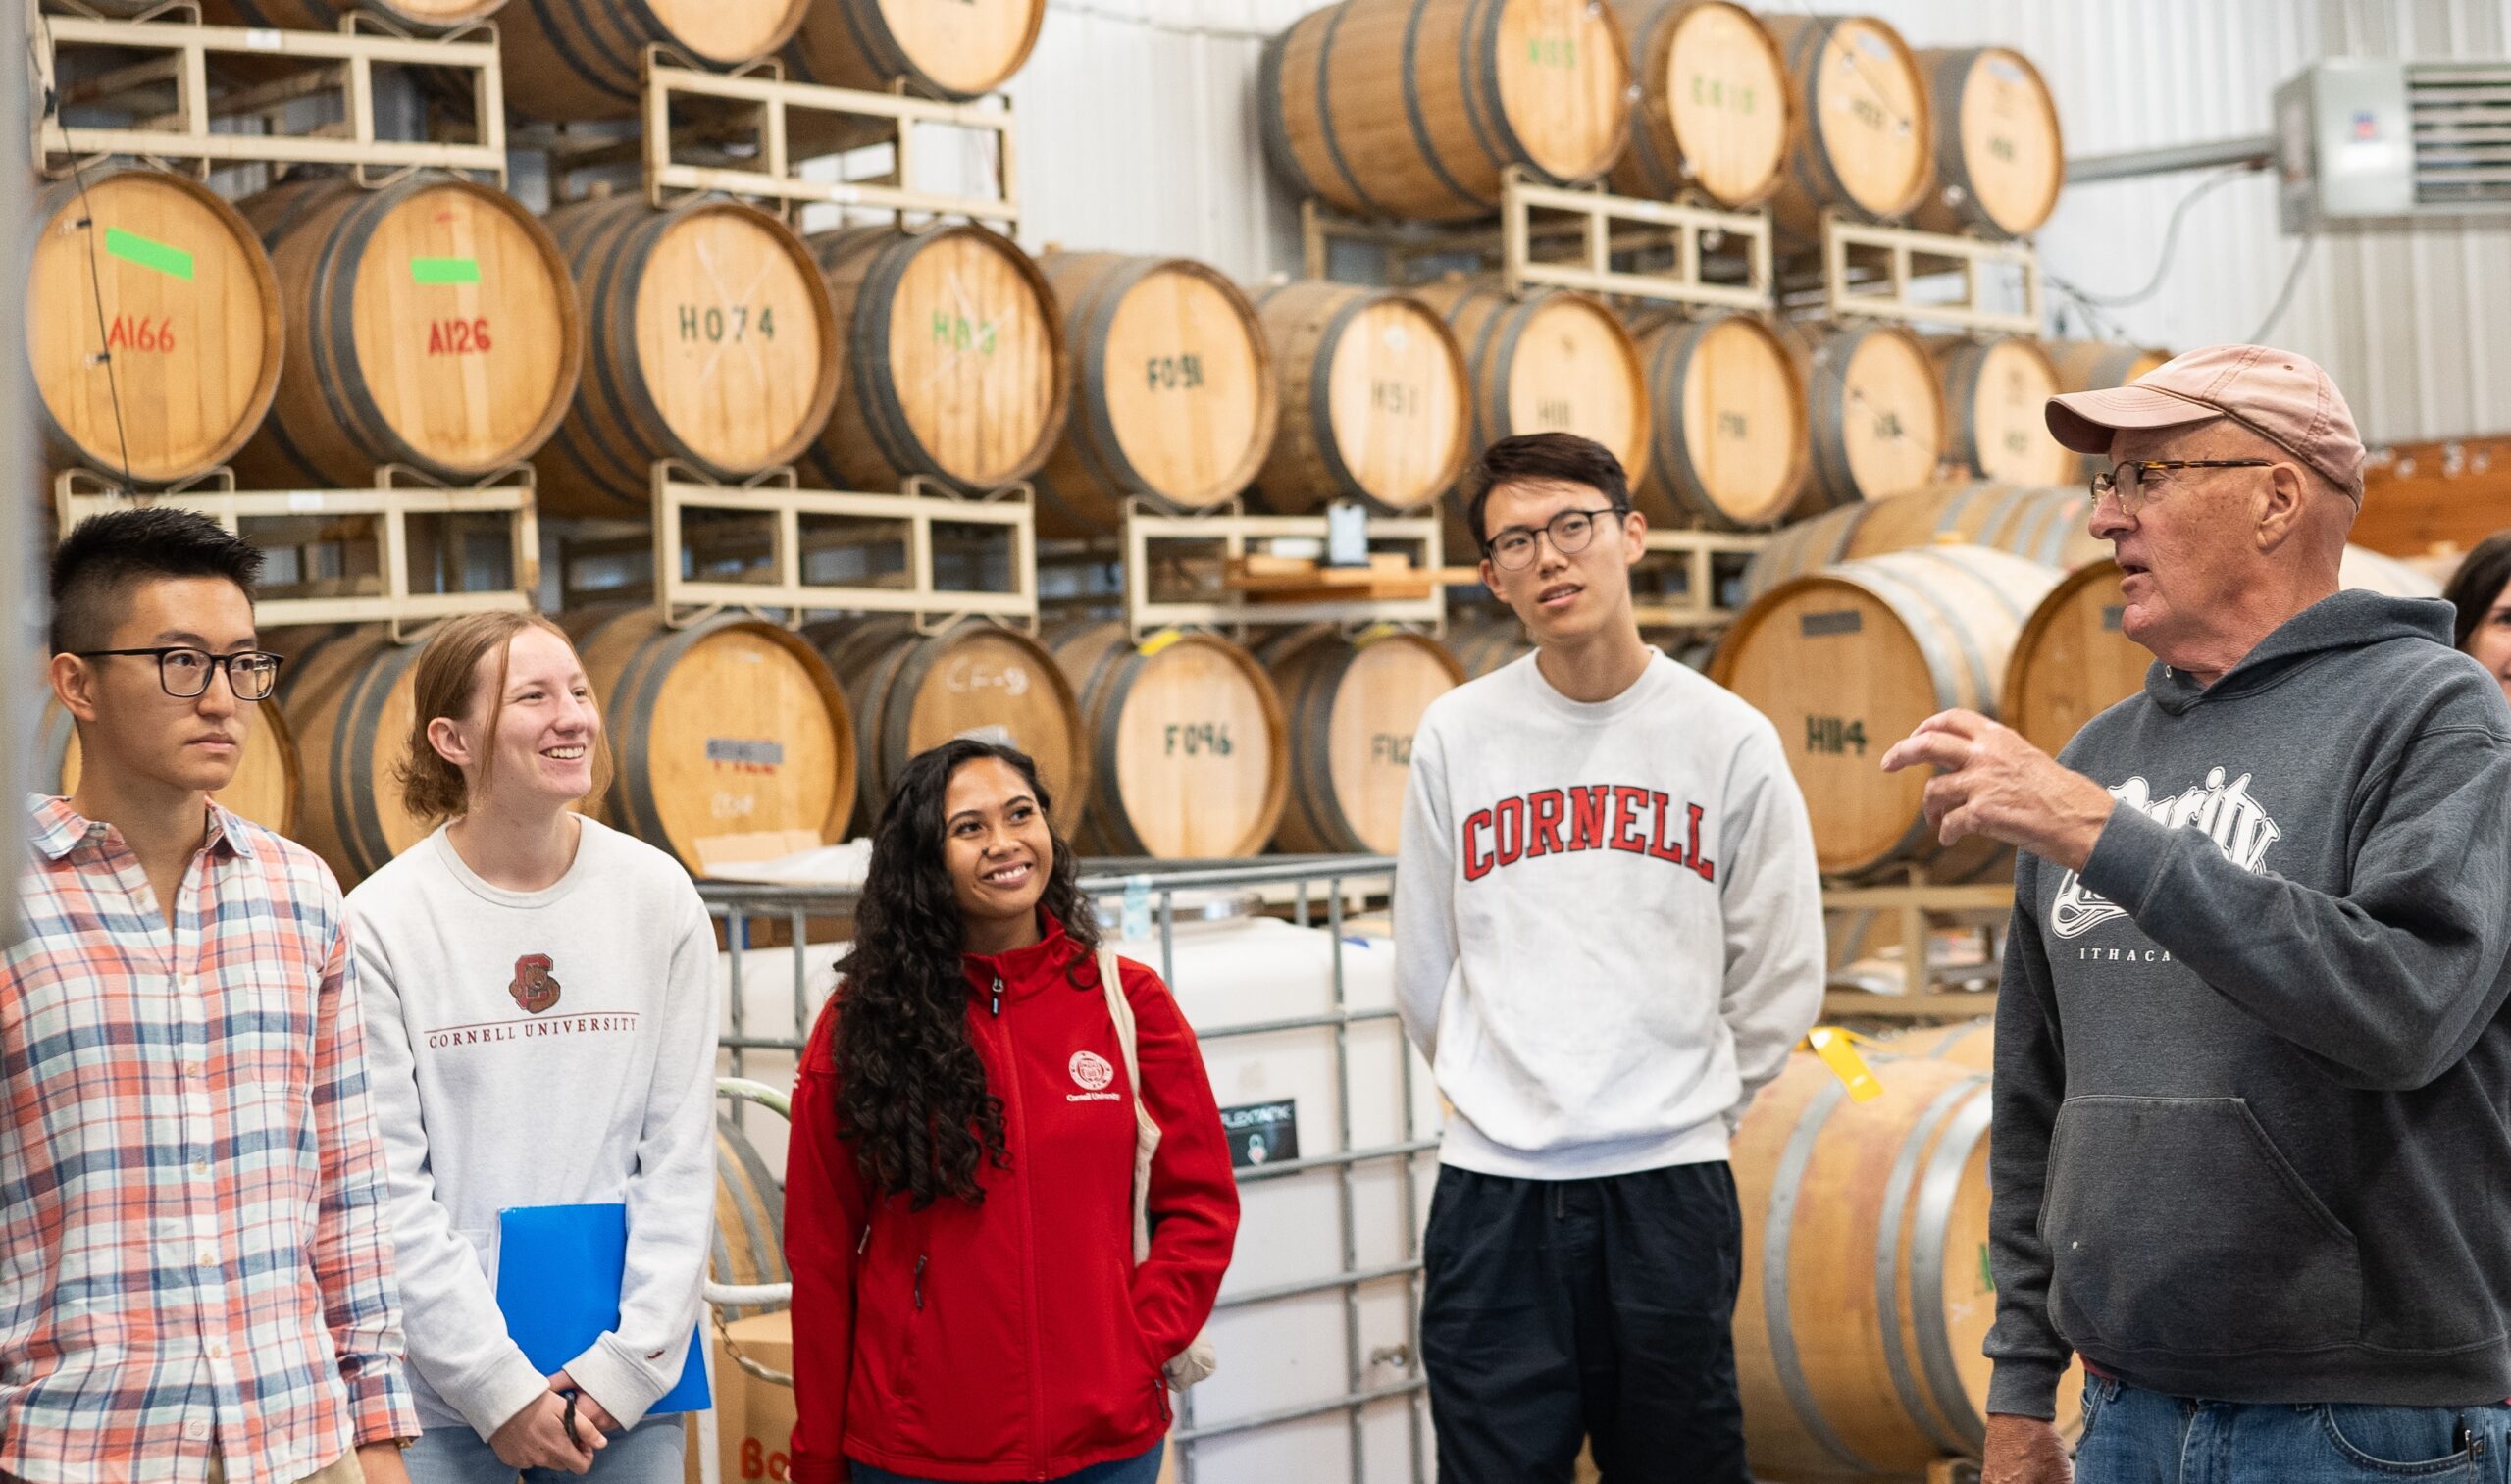 Four students and the owner of Treleaven winery stand in front of wooden wine barrels.